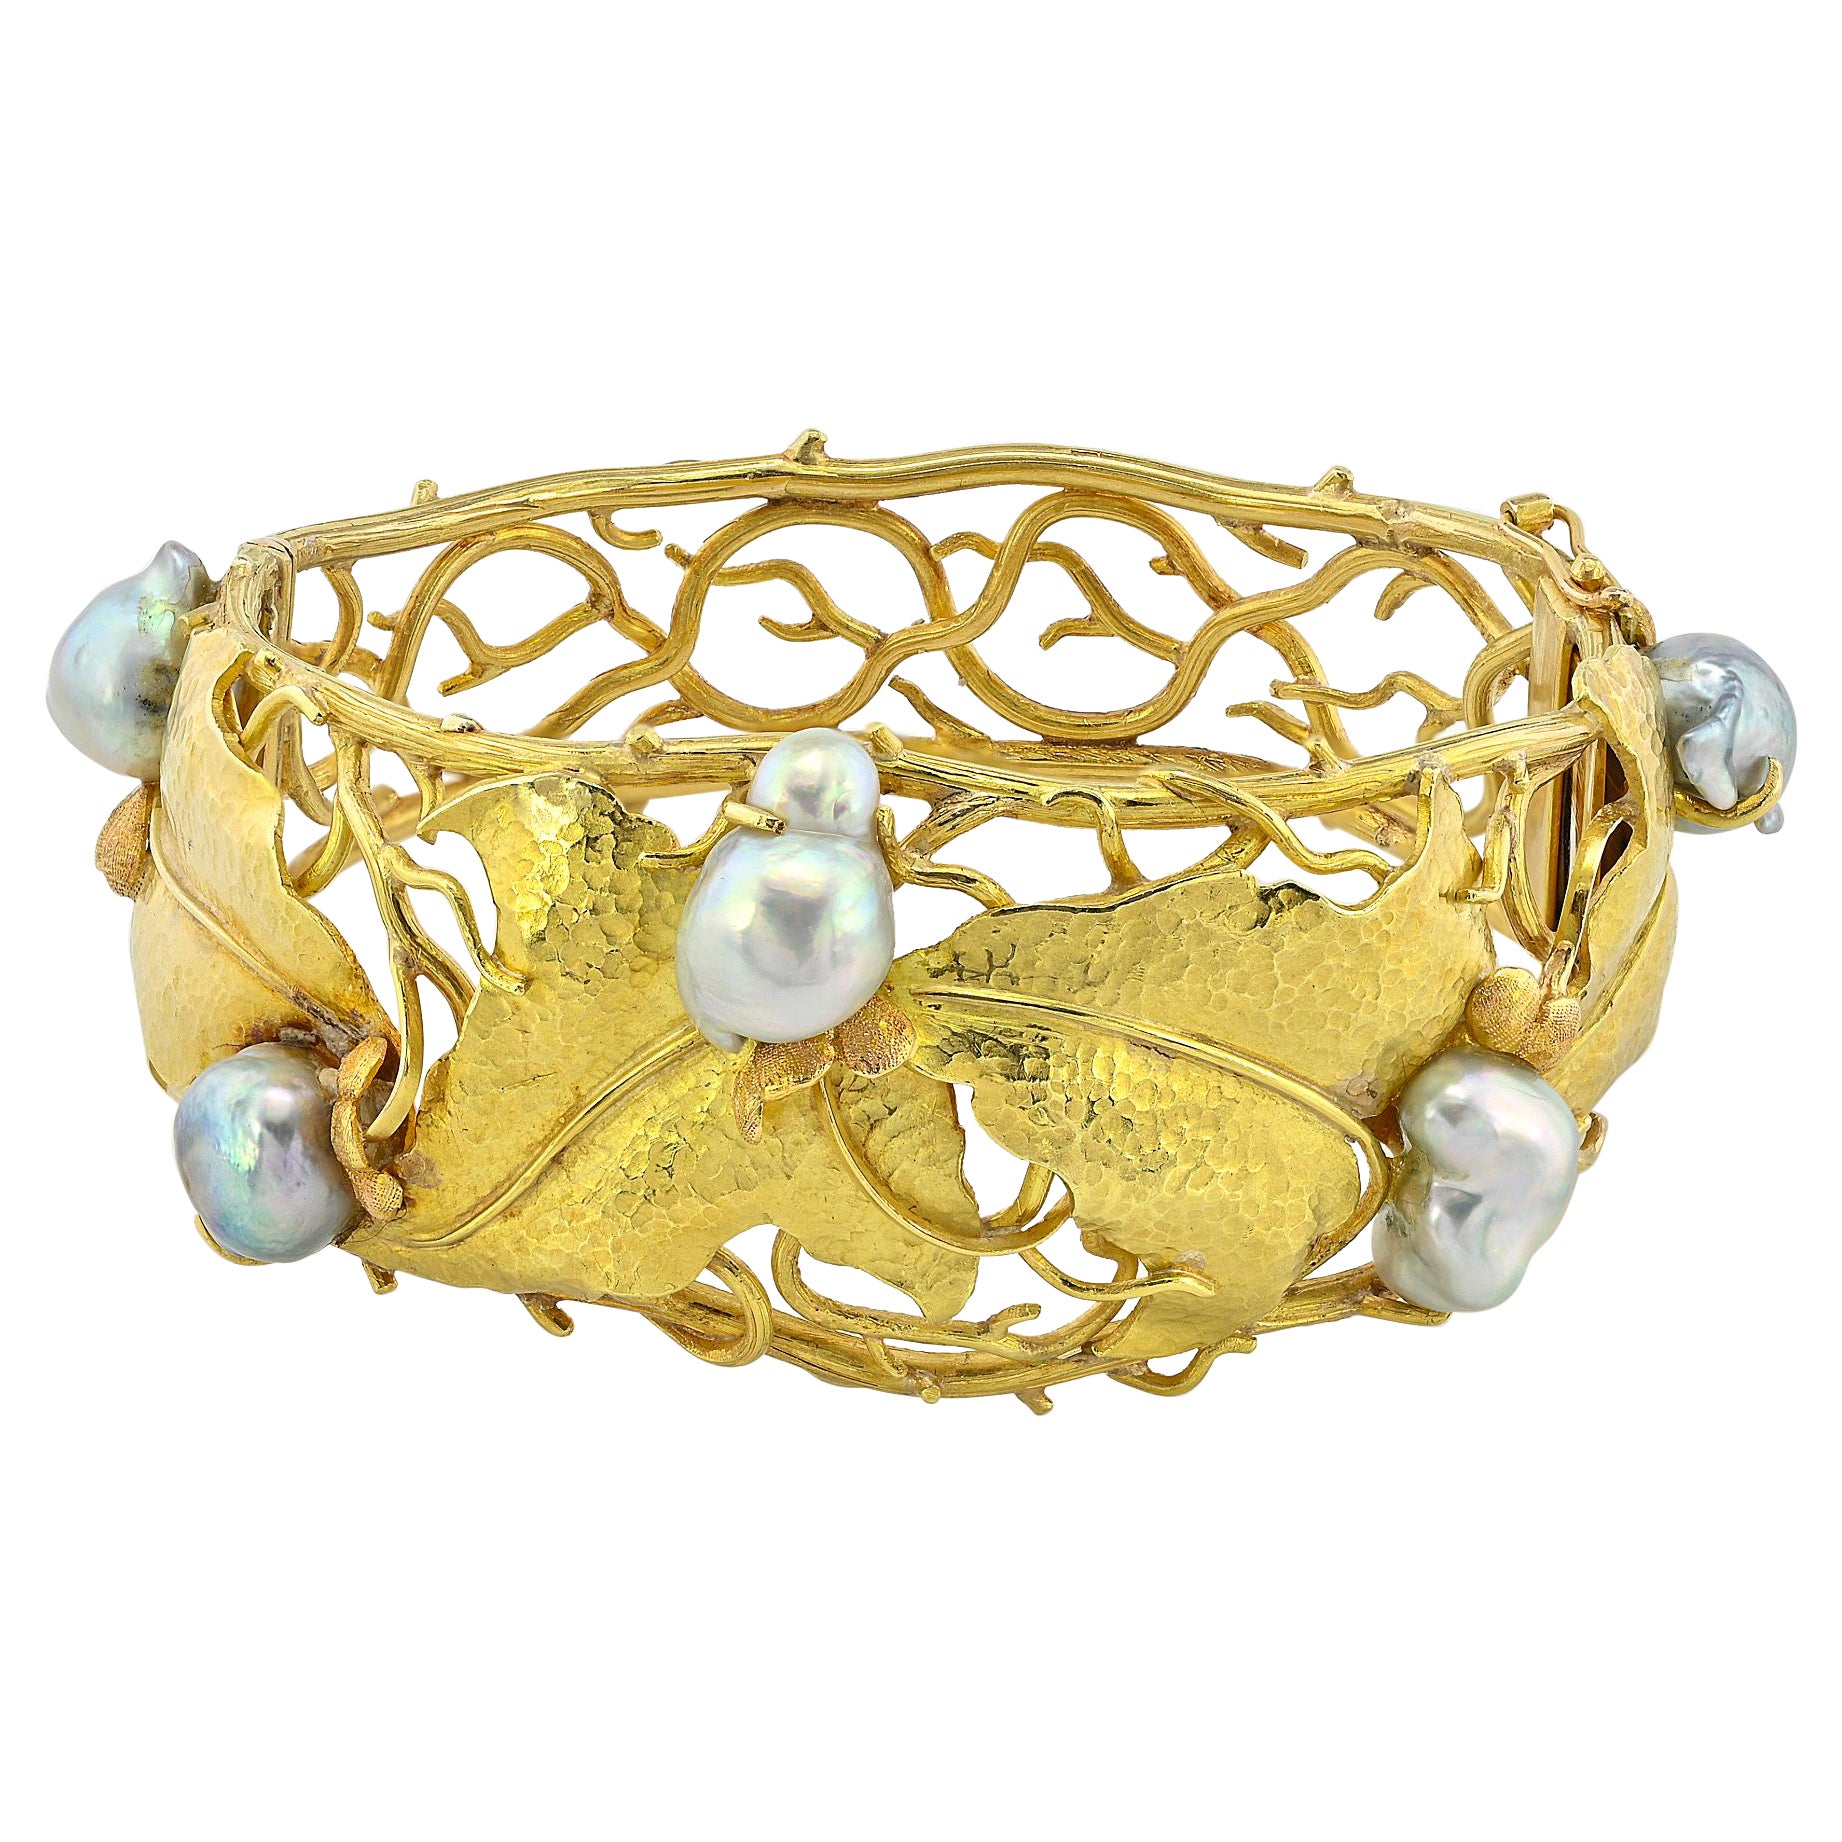  Signed Cecconi Leaf and Pearl 18 KT Mid-century Bangle For Sale